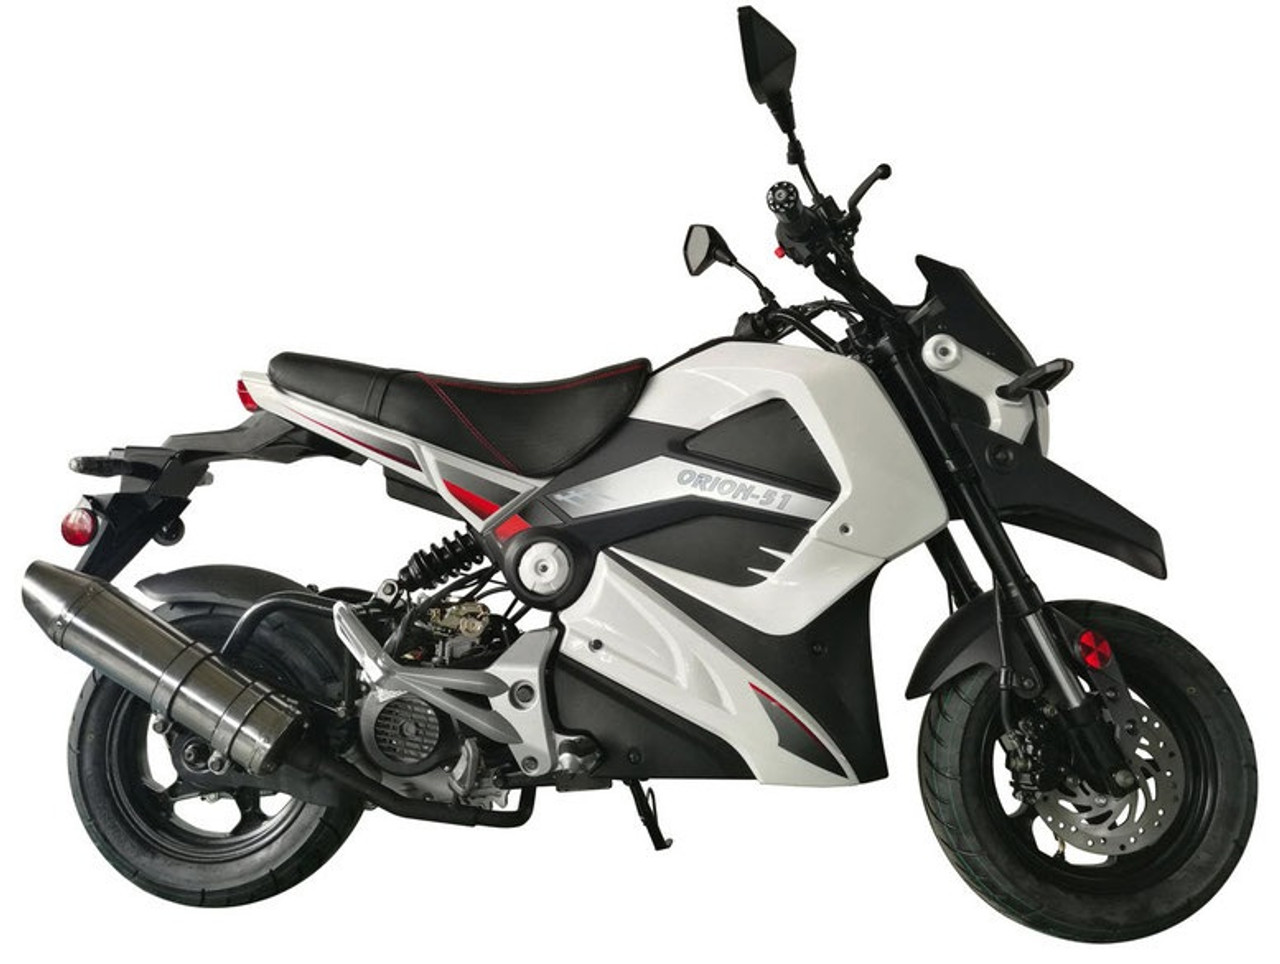 Vitacci Orion 49cc Motorcycle, Electric/Kick, 4 Stroke, Single Cylinder, Air-Forced Cool - WHITE